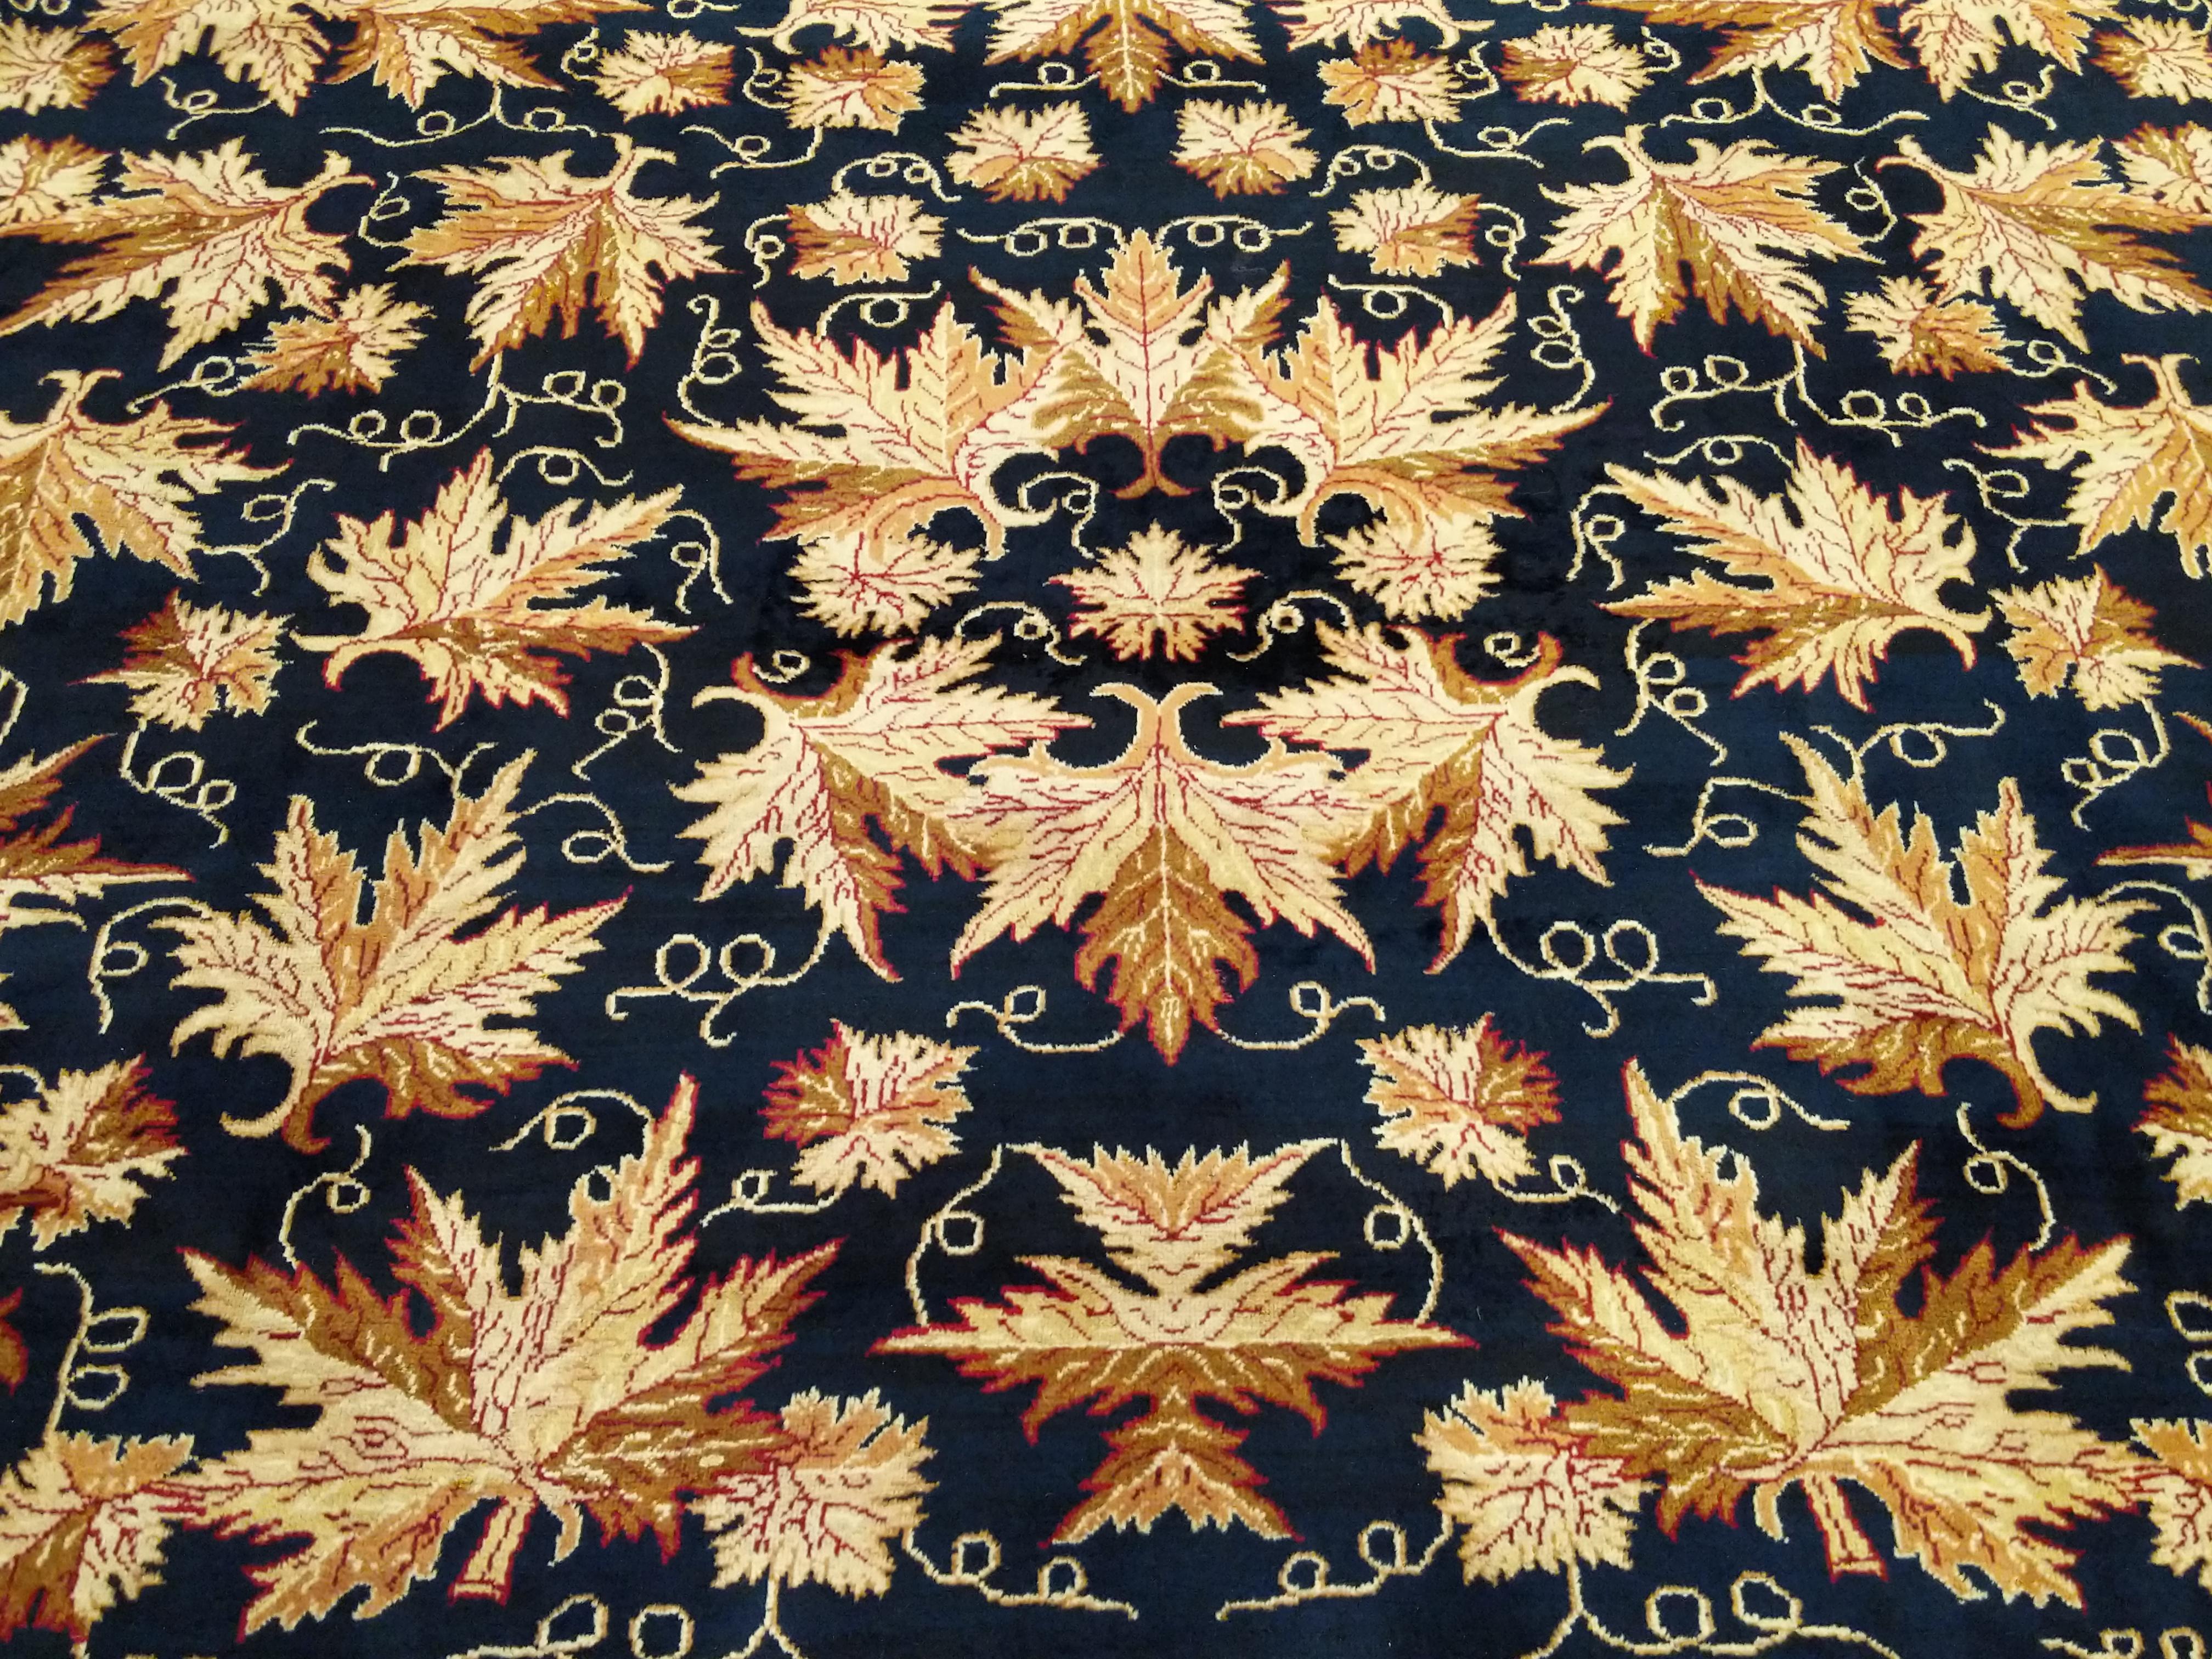 A highly unusual rug distinguished by a repeat pattern of realistically drawn oak leafs on a midnight blue background. Finely knotted for this type, it is quite subdued with its neutral palette of naturally contrasting leafs. A very durable carpet